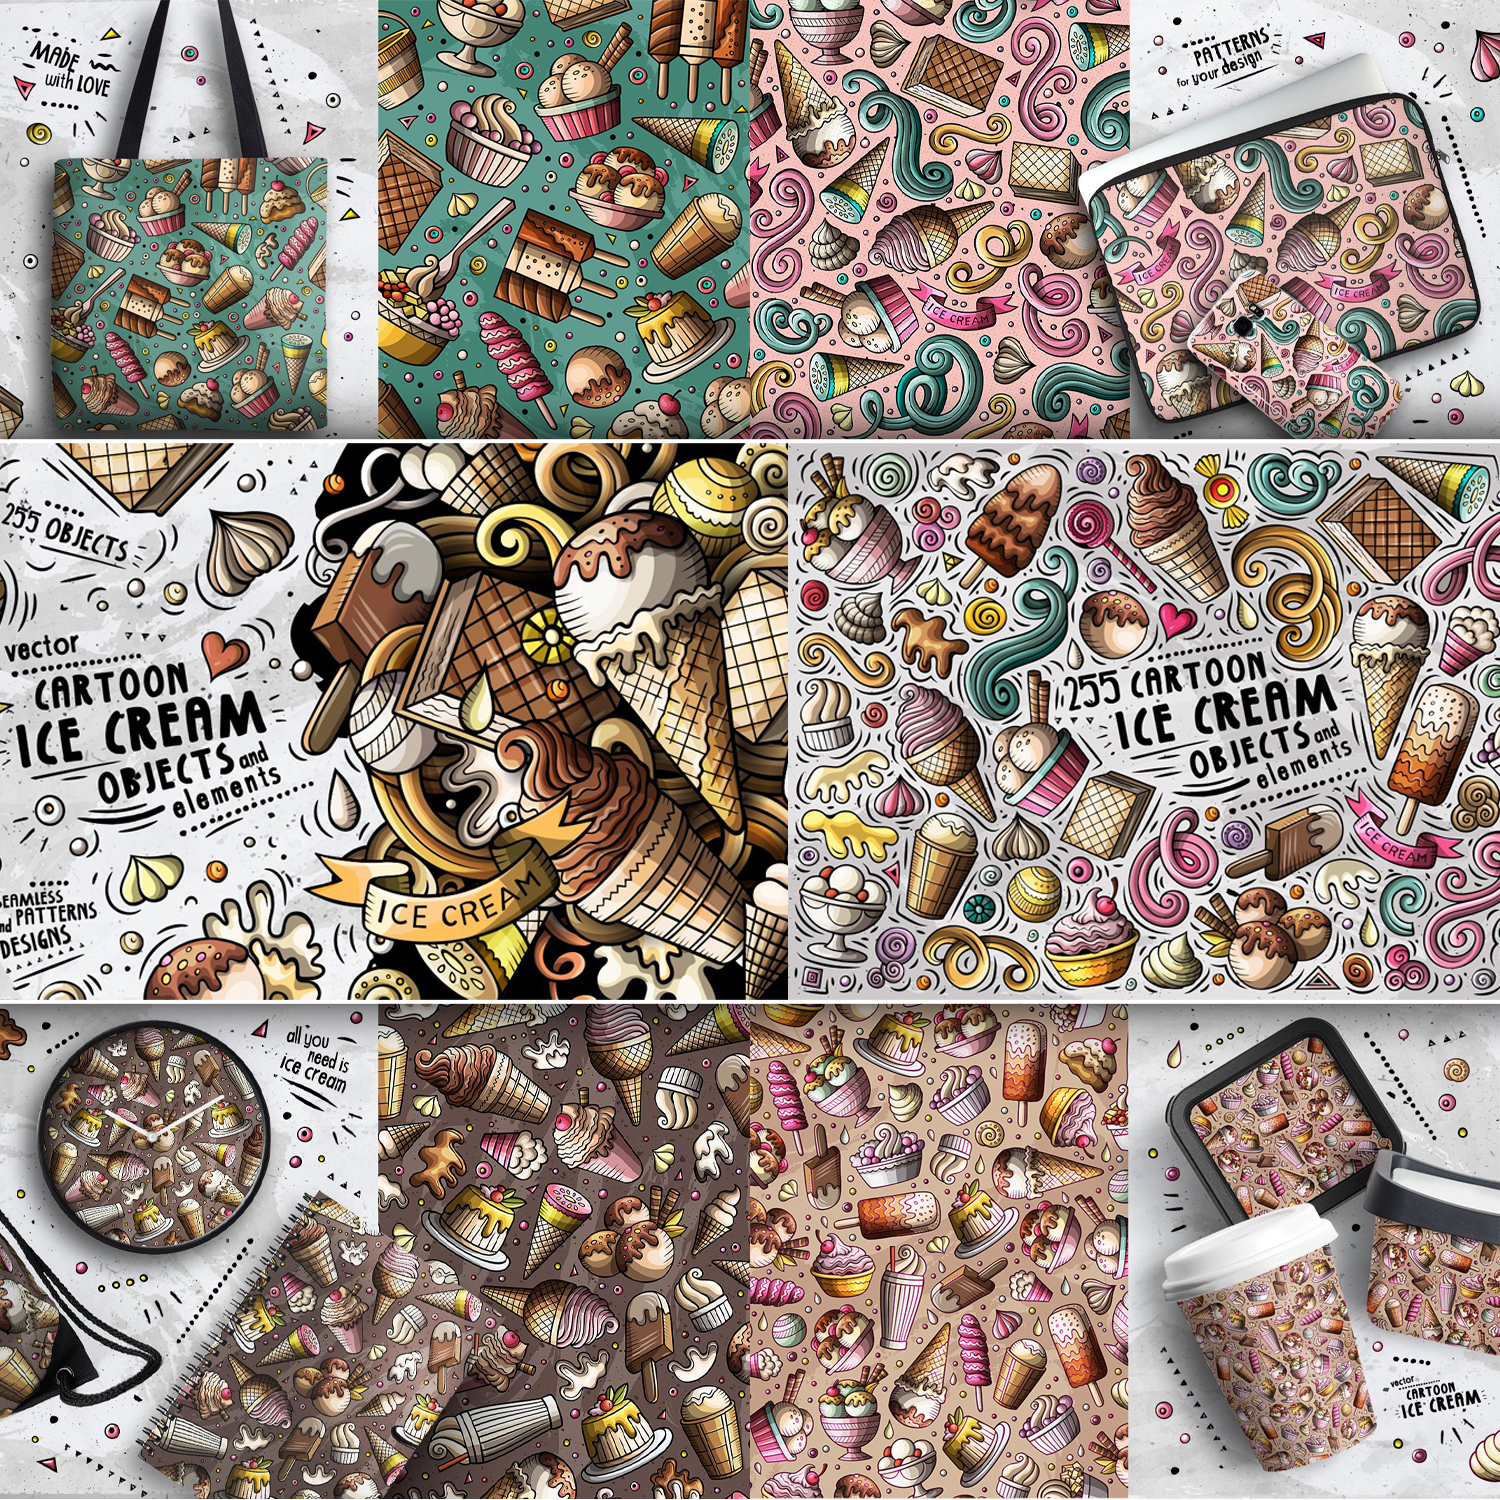 Preview of prints in different versions and conditions on the theme of ice cream.